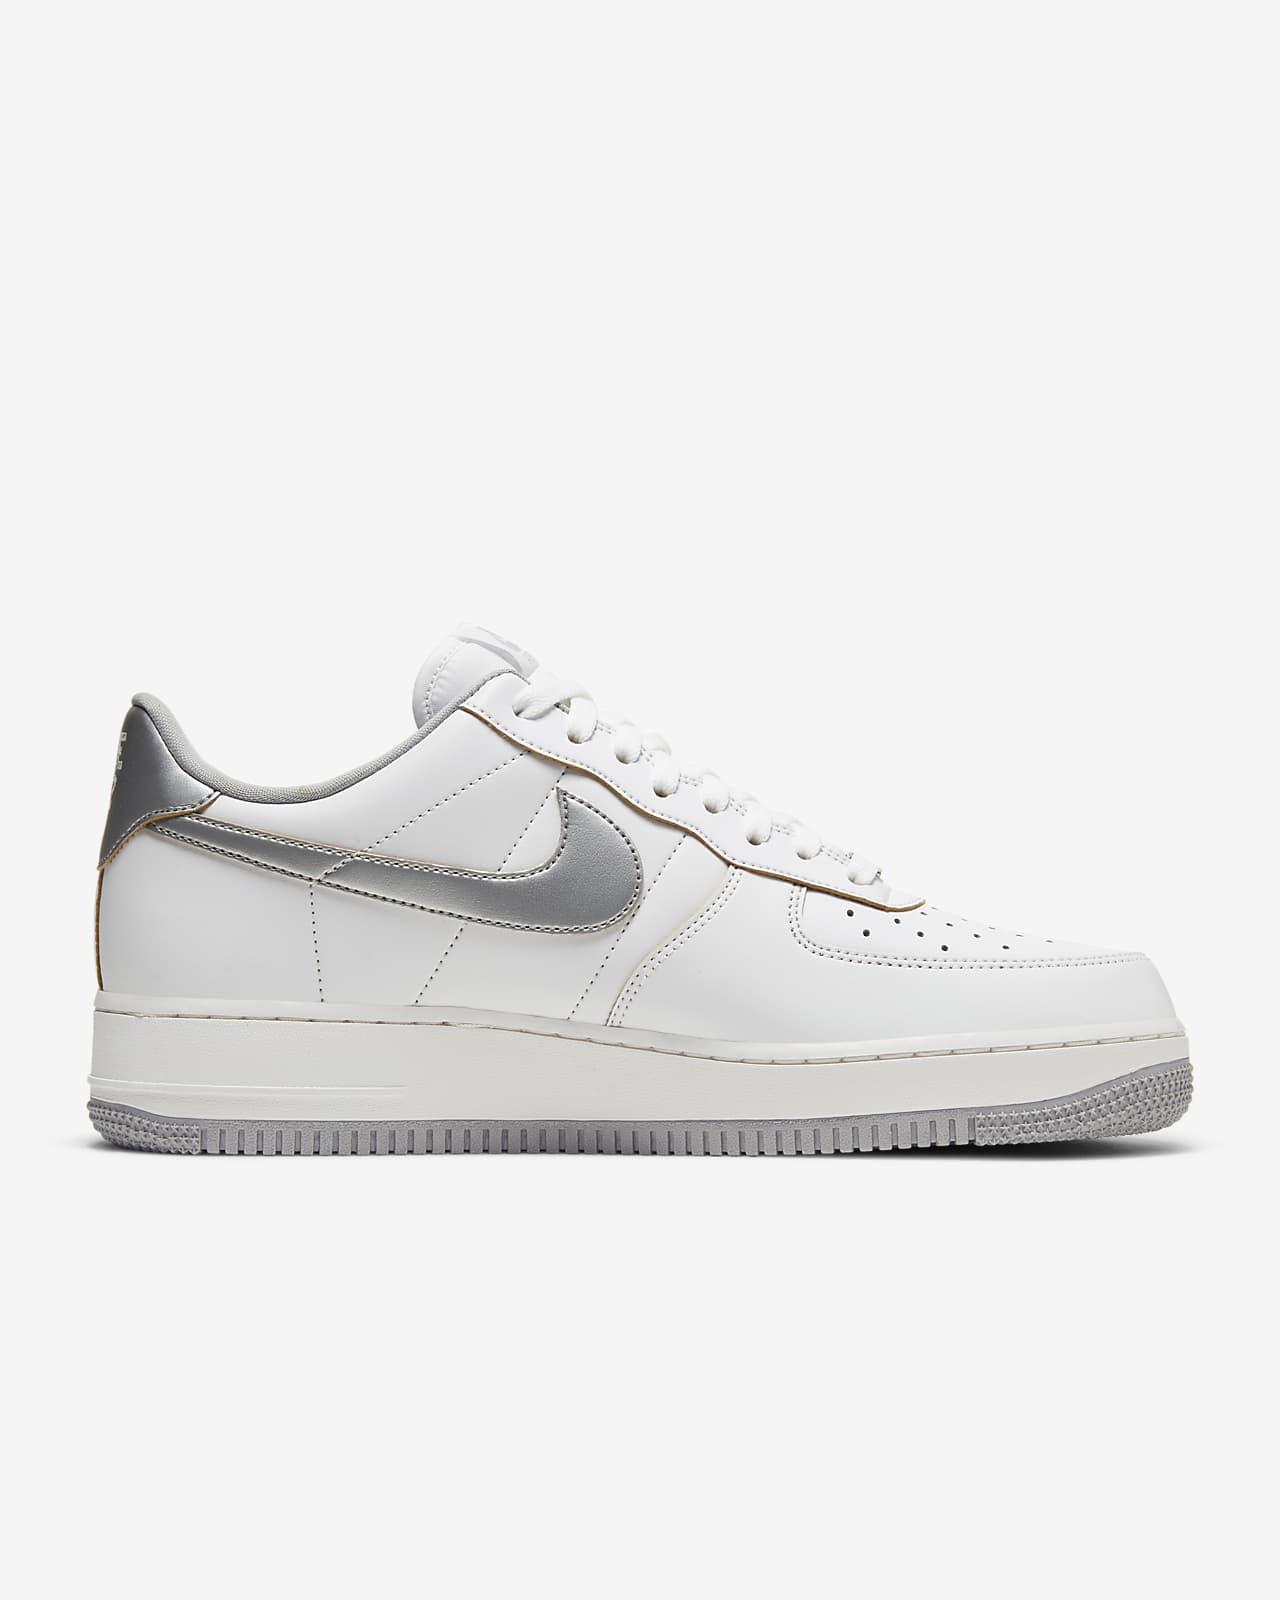 nike-air-force-1-label-maker-dc5209-100-release-20201017